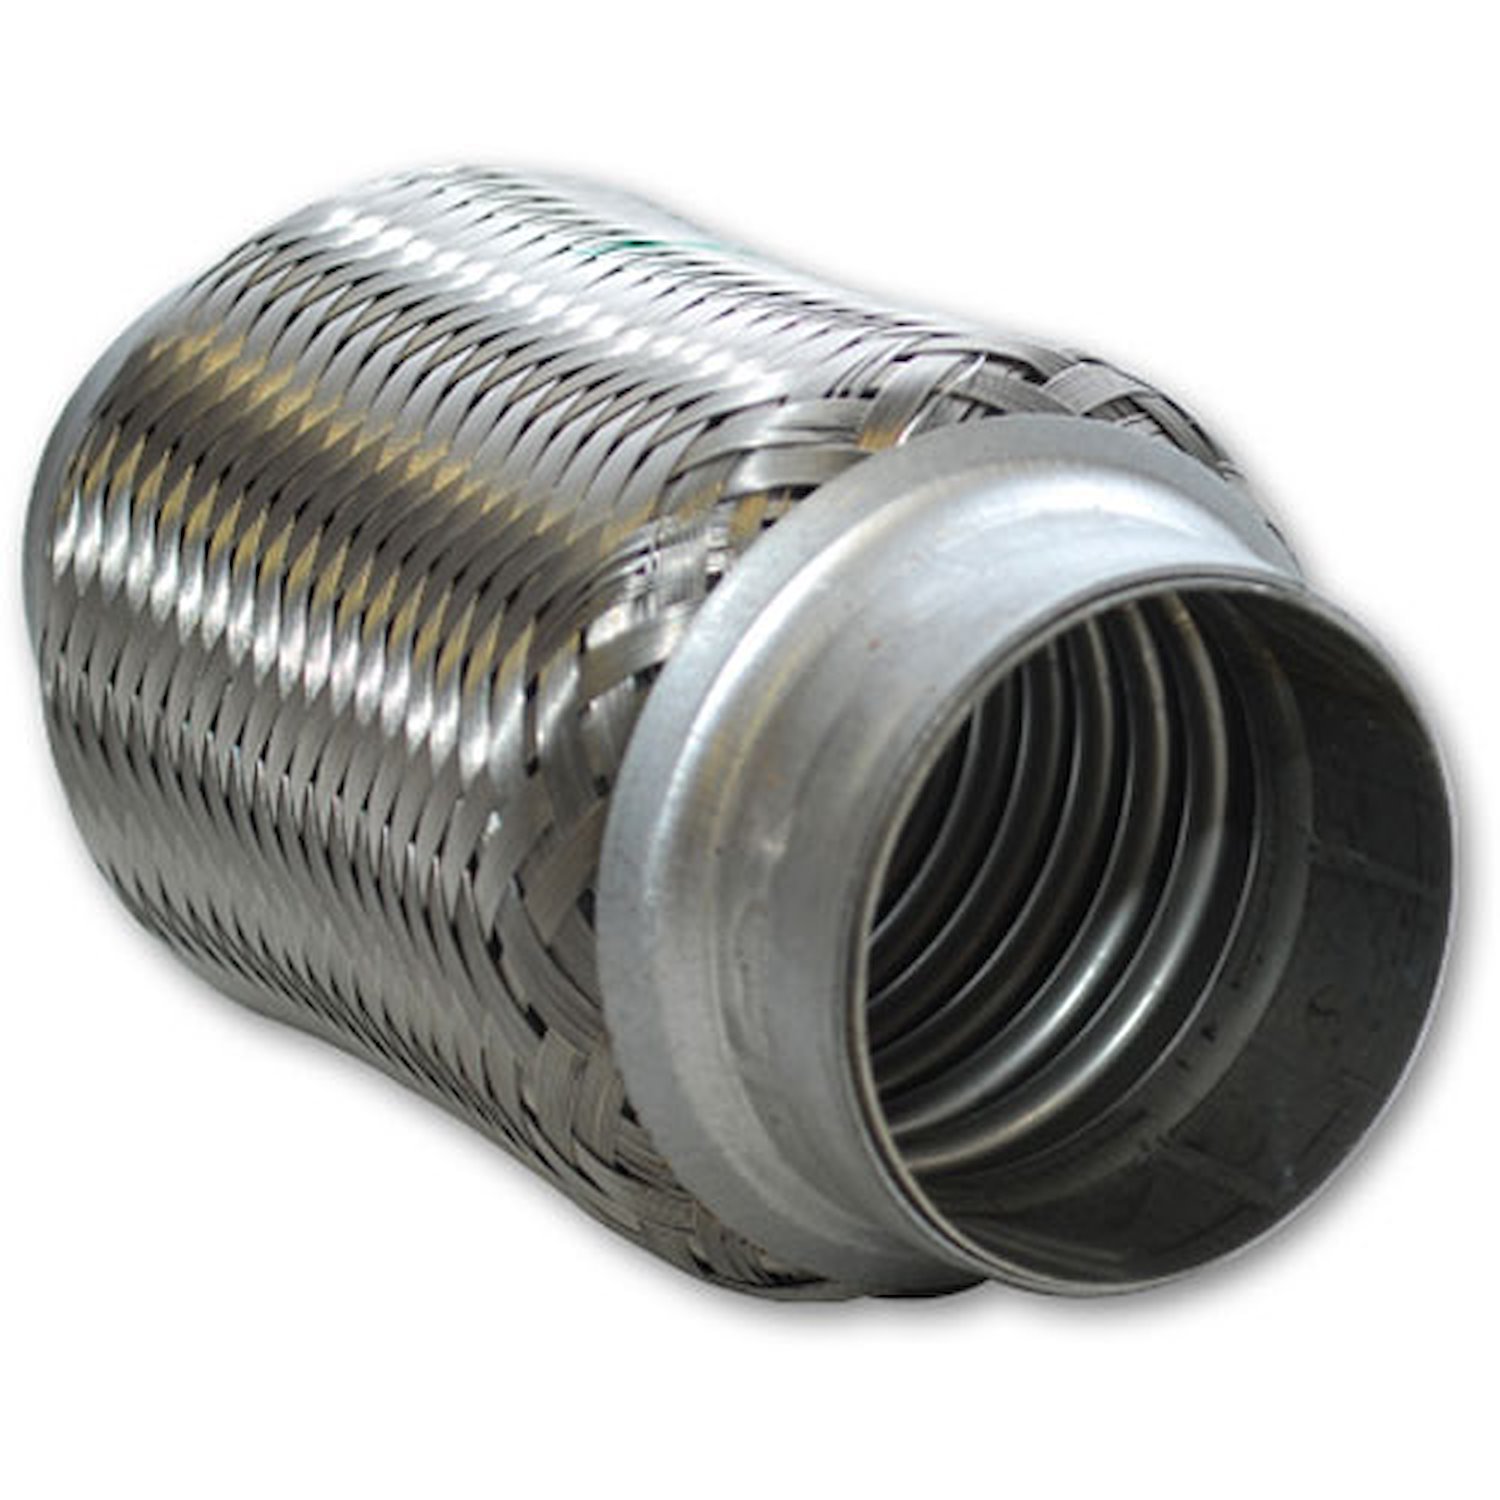 Standard Flex Coupling Without Inner Liner 2.5" Inlet/Outlet Diamater